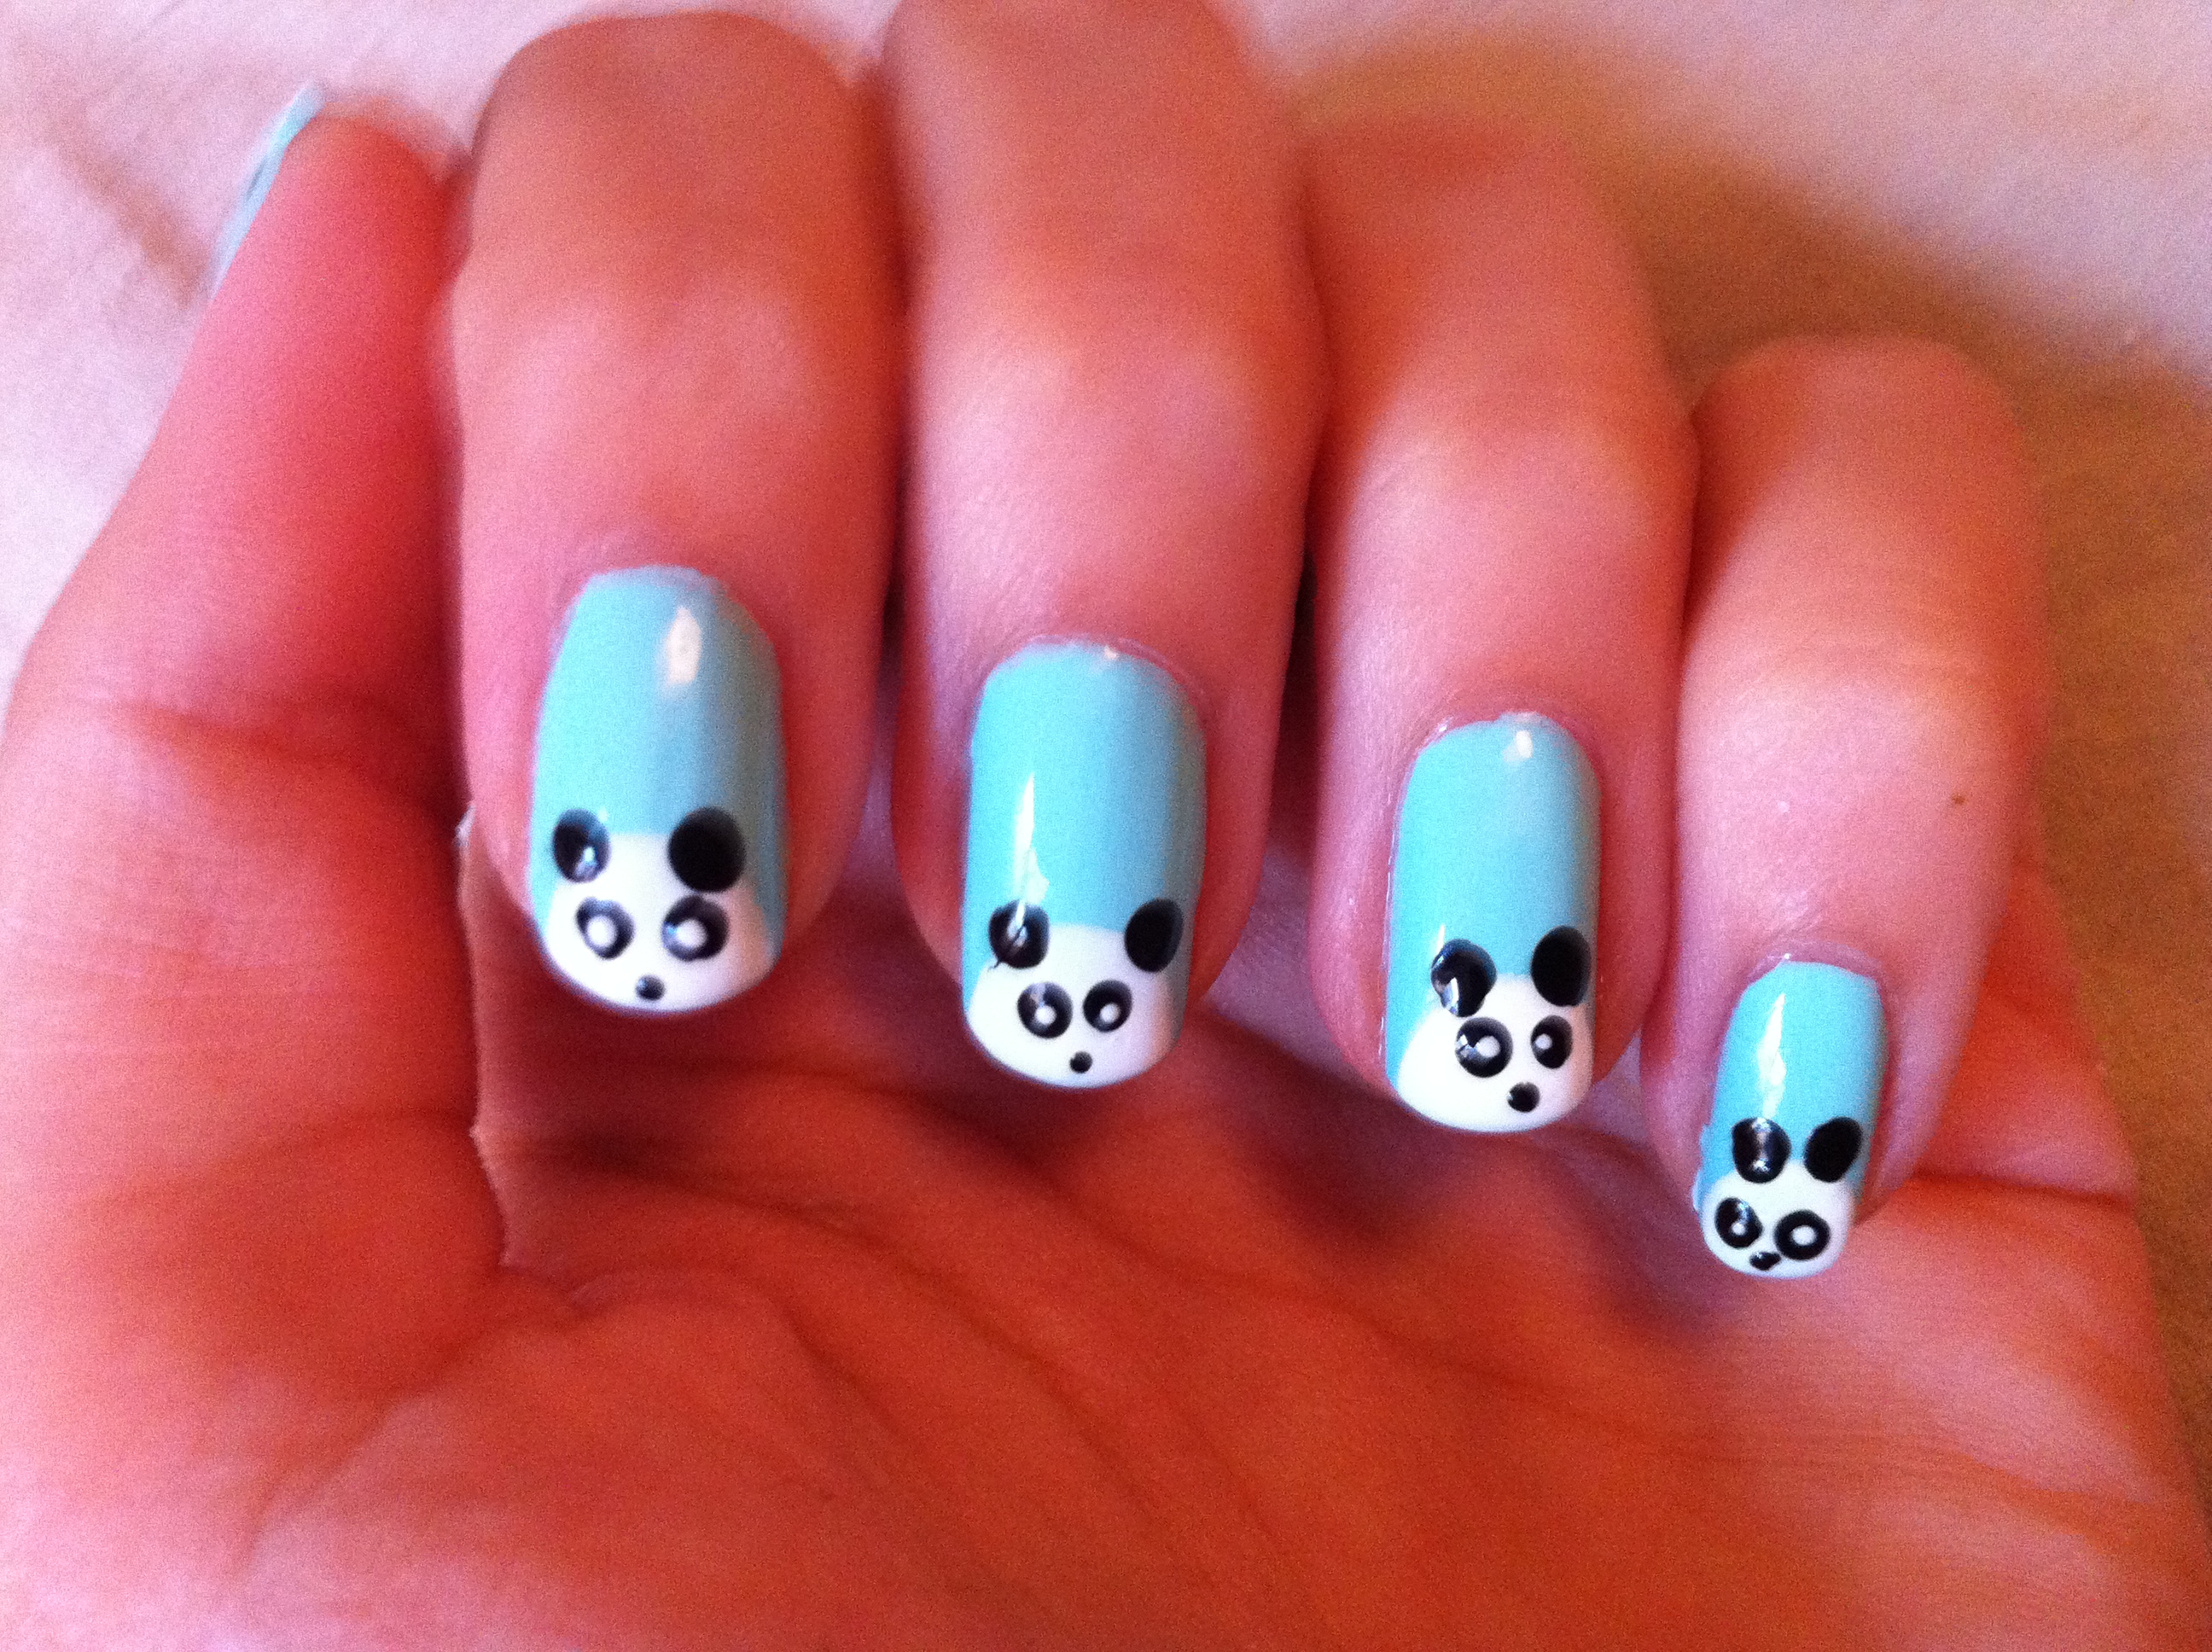 The channel is called Cutepolish! This tutorial is for Panda nails